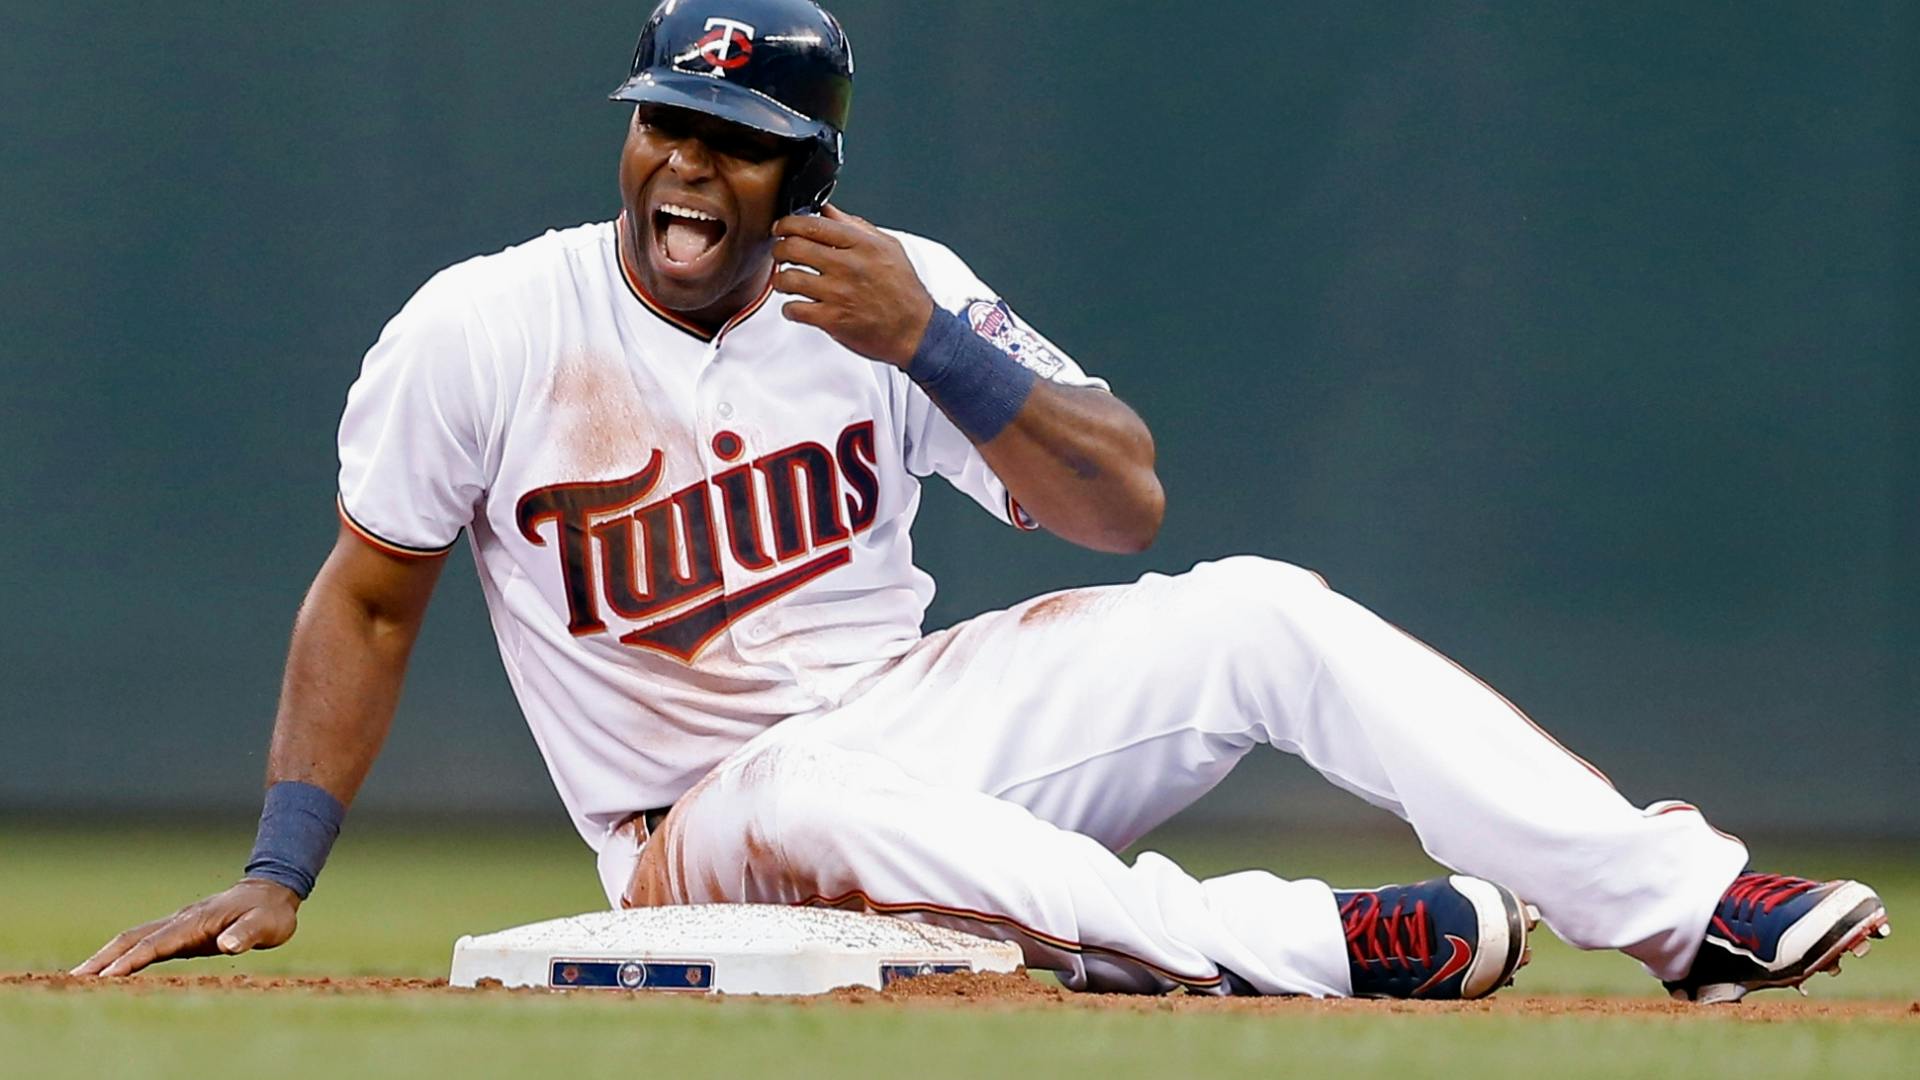 Twins right fielder Torii Hunter says he had Billy Butler's popup in his glove, but running into the wall jarred it loose Monday, and Butler drive home a run on the next pitch.